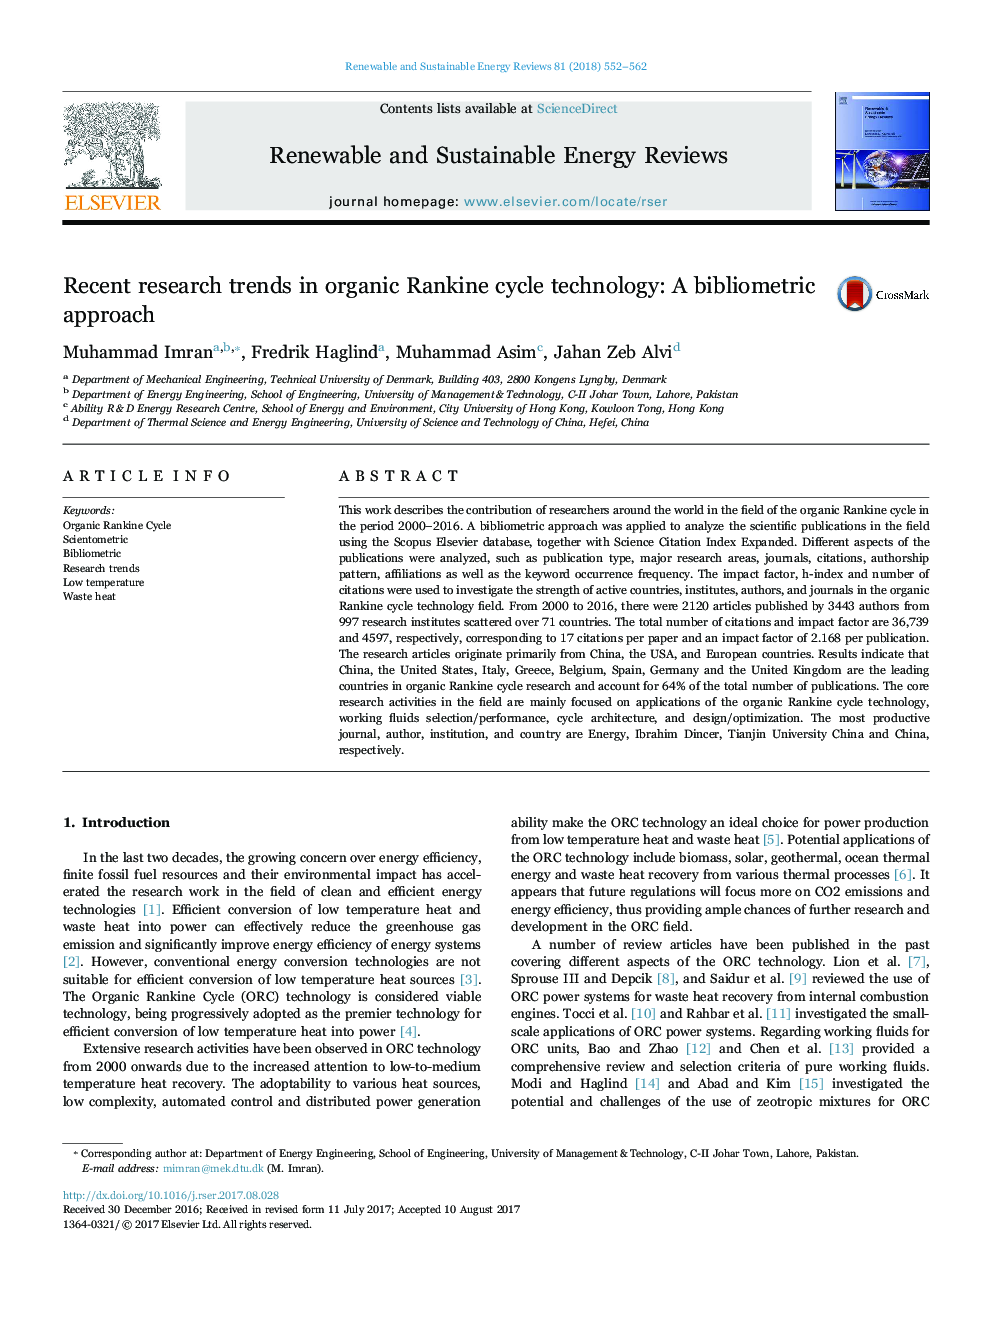 Recent research trends in organic Rankine cycle technology: A bibliometric approach